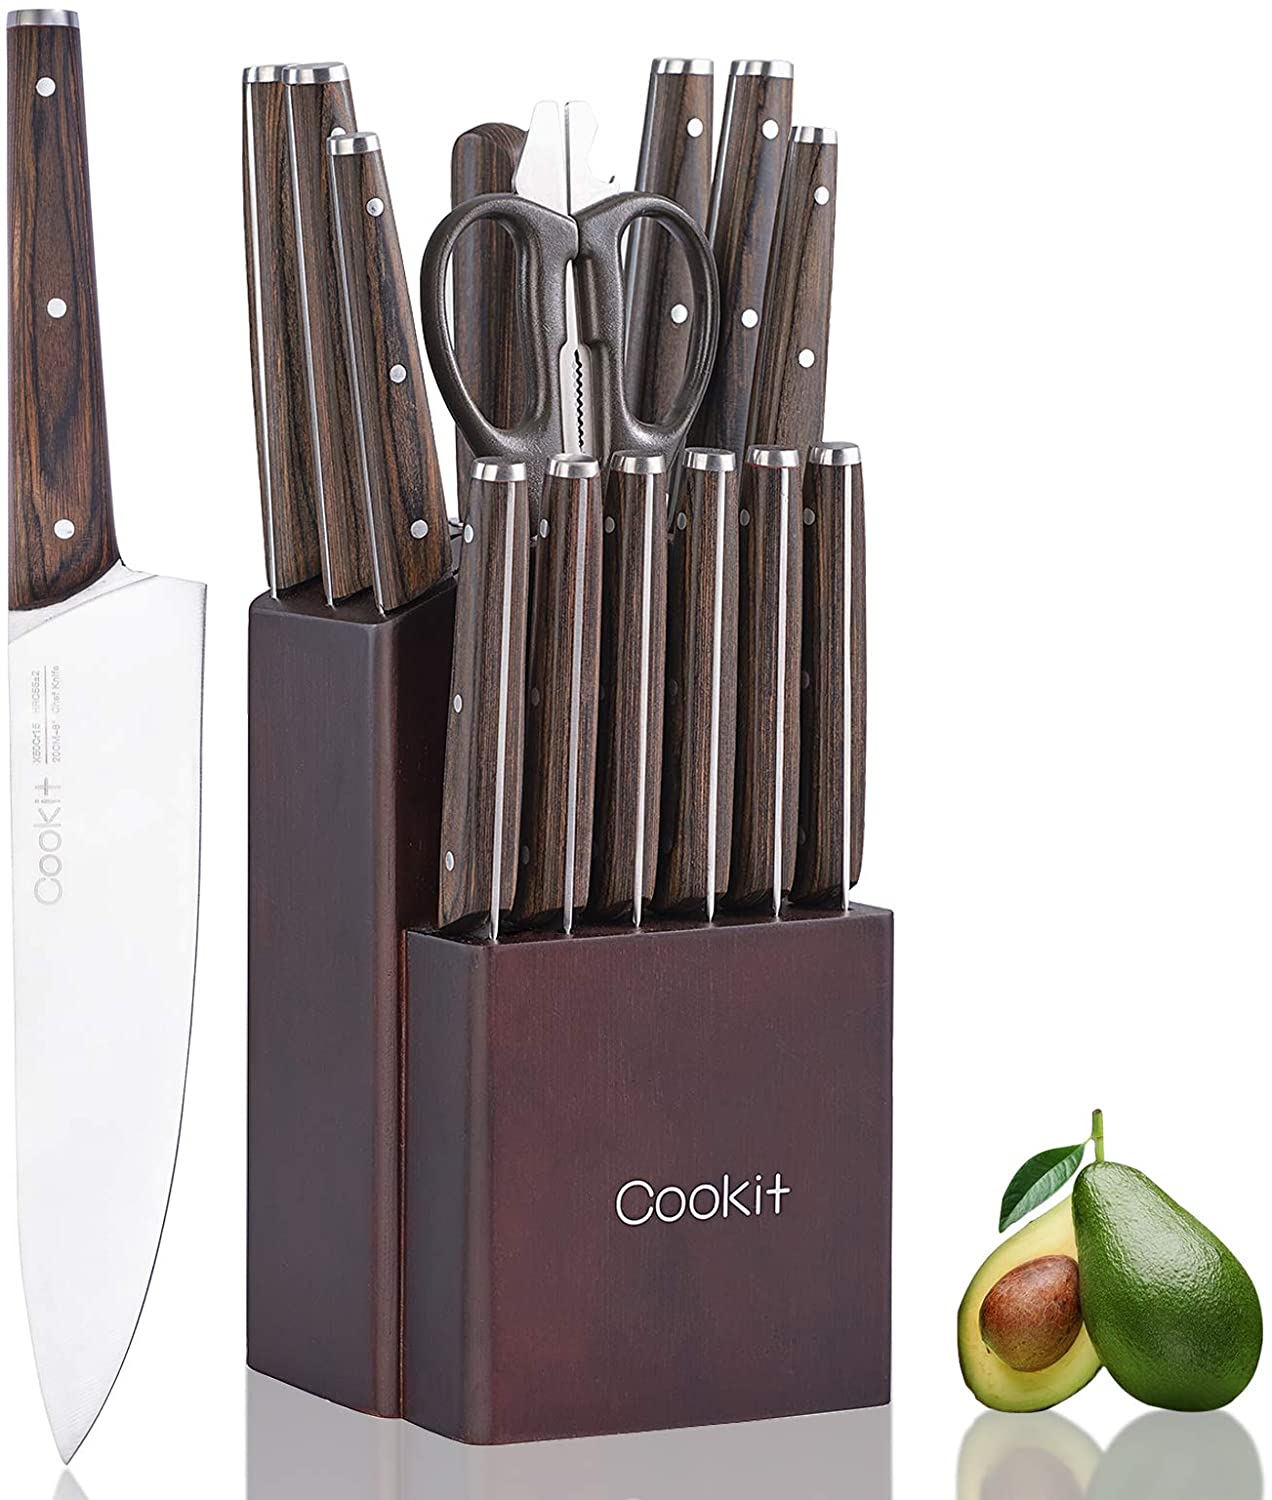 Dropship CHUSHIJI Knife Sets For Kitchen With Block And Sharpener 7-Pieces  Premium Stainless Steel Kitchen Knife Sets With Block - Hard Wood Brown Knife  Block Set to Sell Online at a Lower